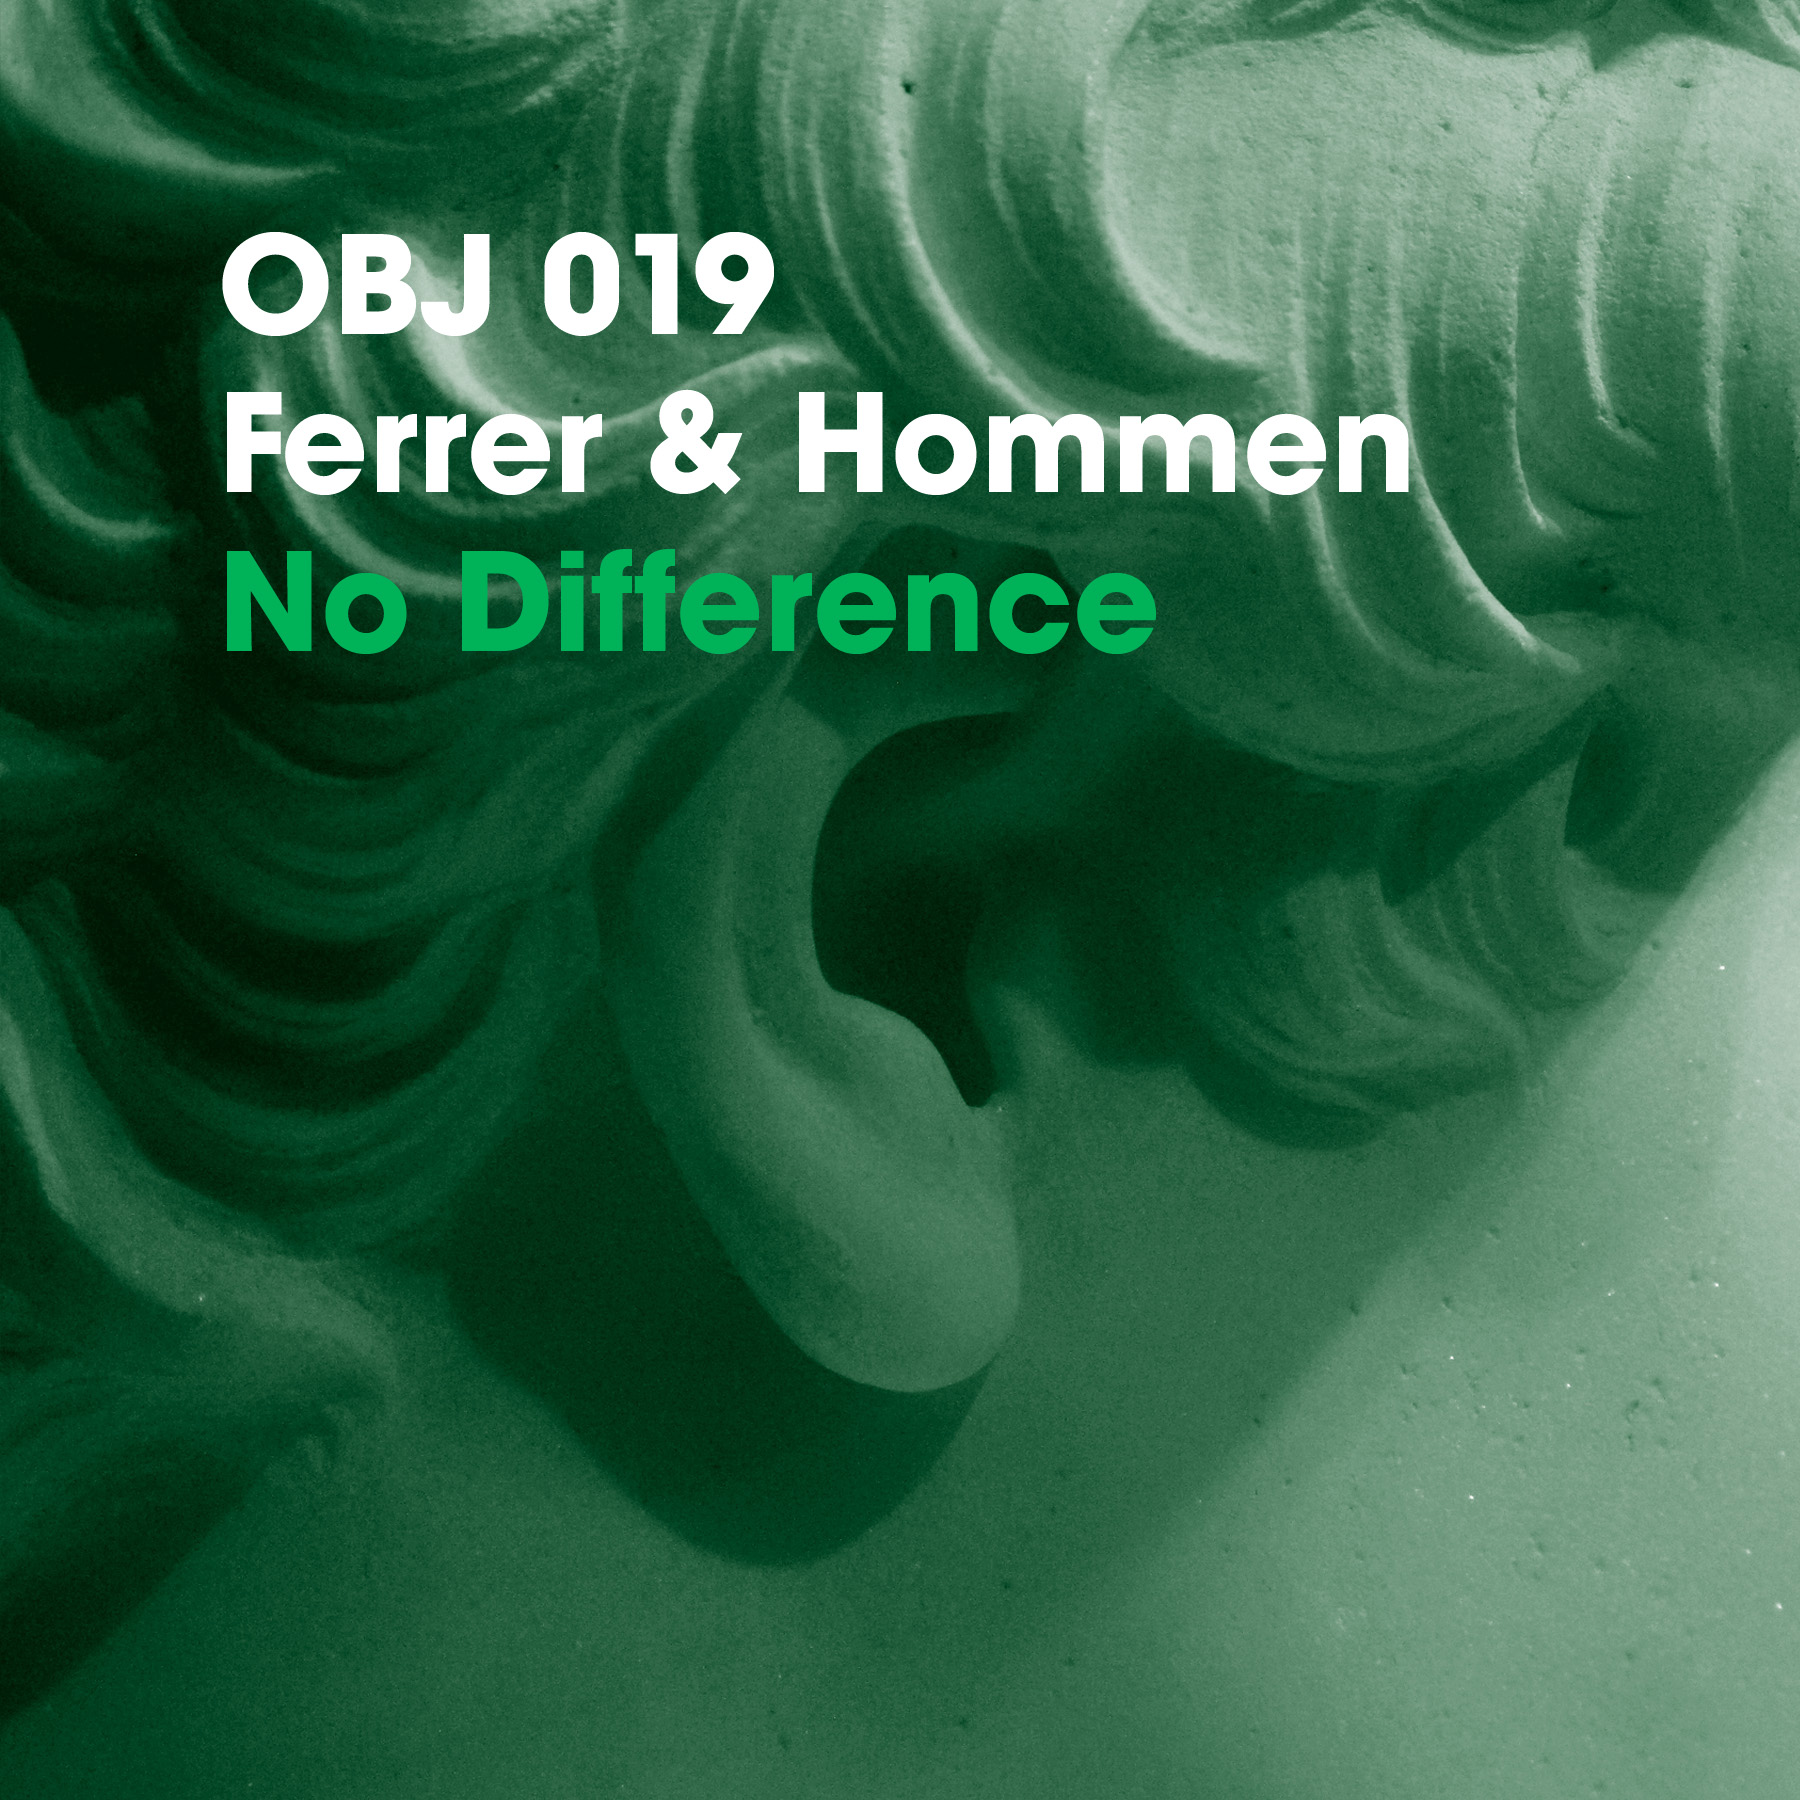 Dennis Ferrer and Andre Hommen - No difference